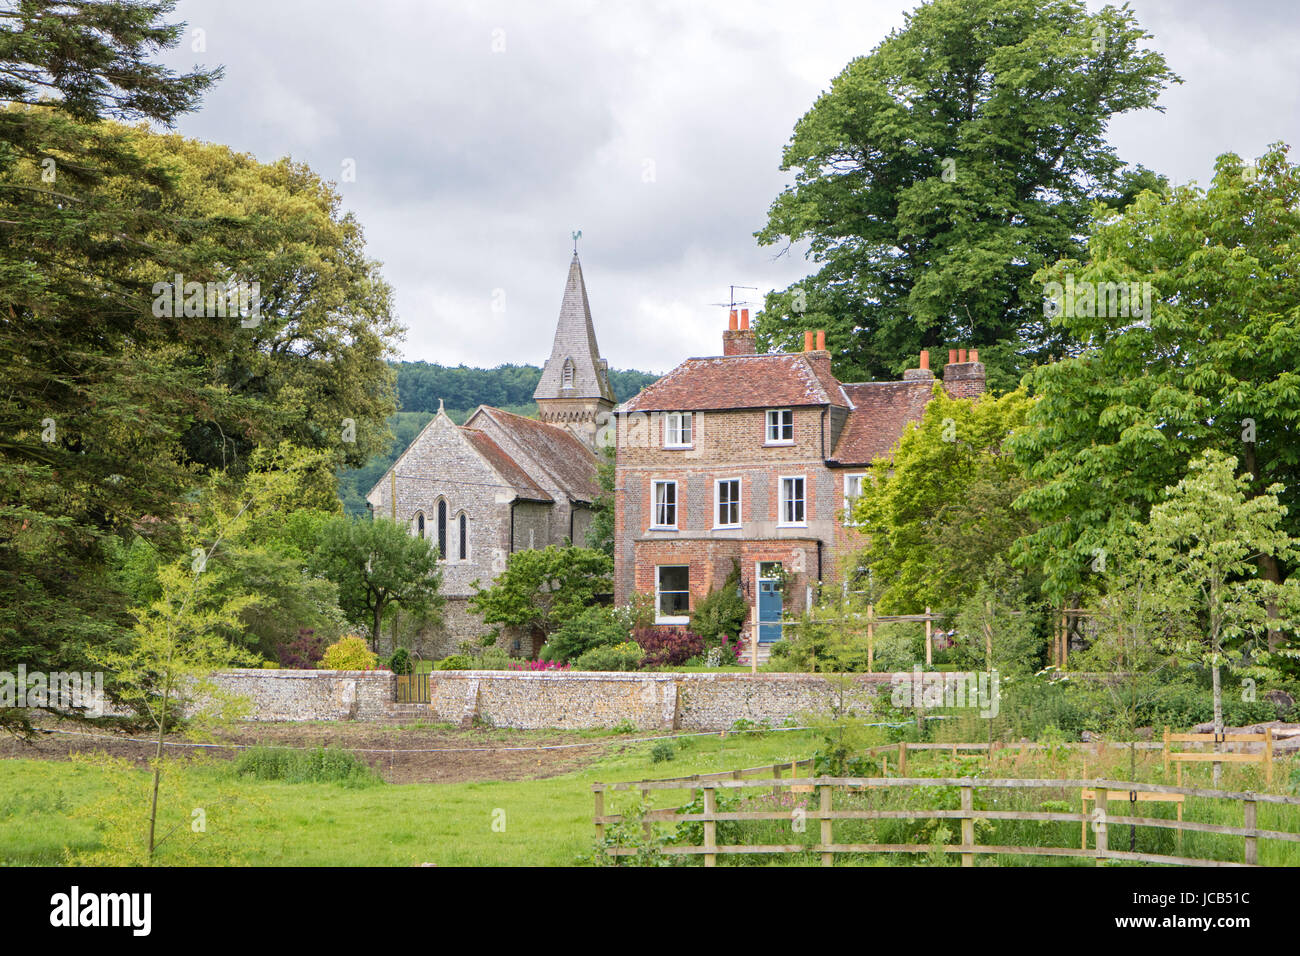 The rural village of South Stoke near Arundel, West Sussex, England, UK Stock Photo